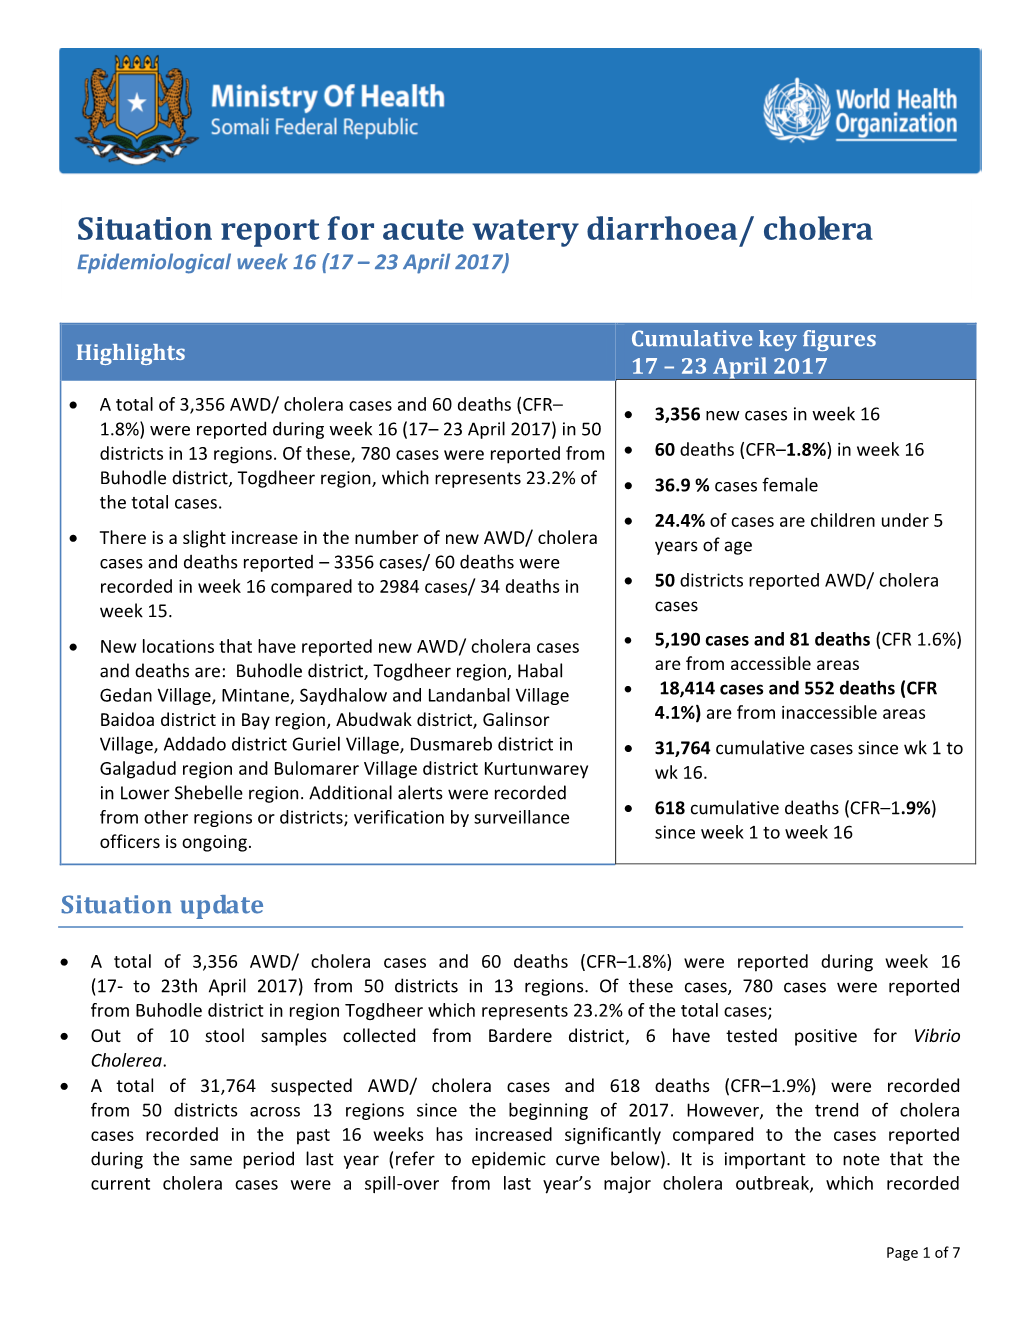 Situation Report for Acute Watery Diarrhoea/ Cholera Epidemiological Week 16 (17 – 23 April 2017)